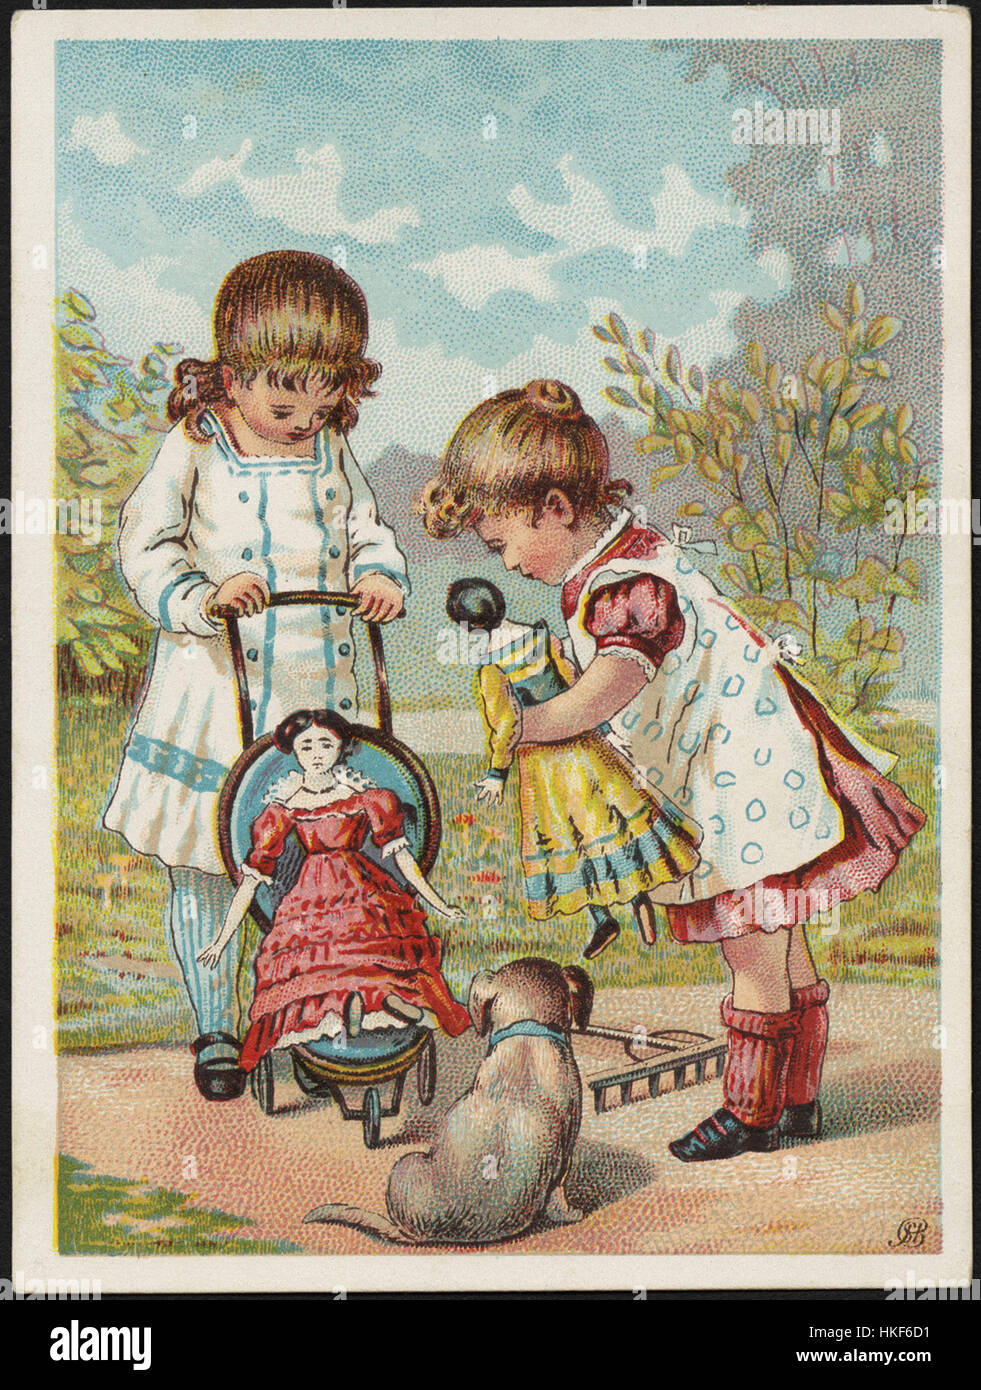 Two girls and a dog, one holding a doll, looking at another doll in a stroller. Stock Photo